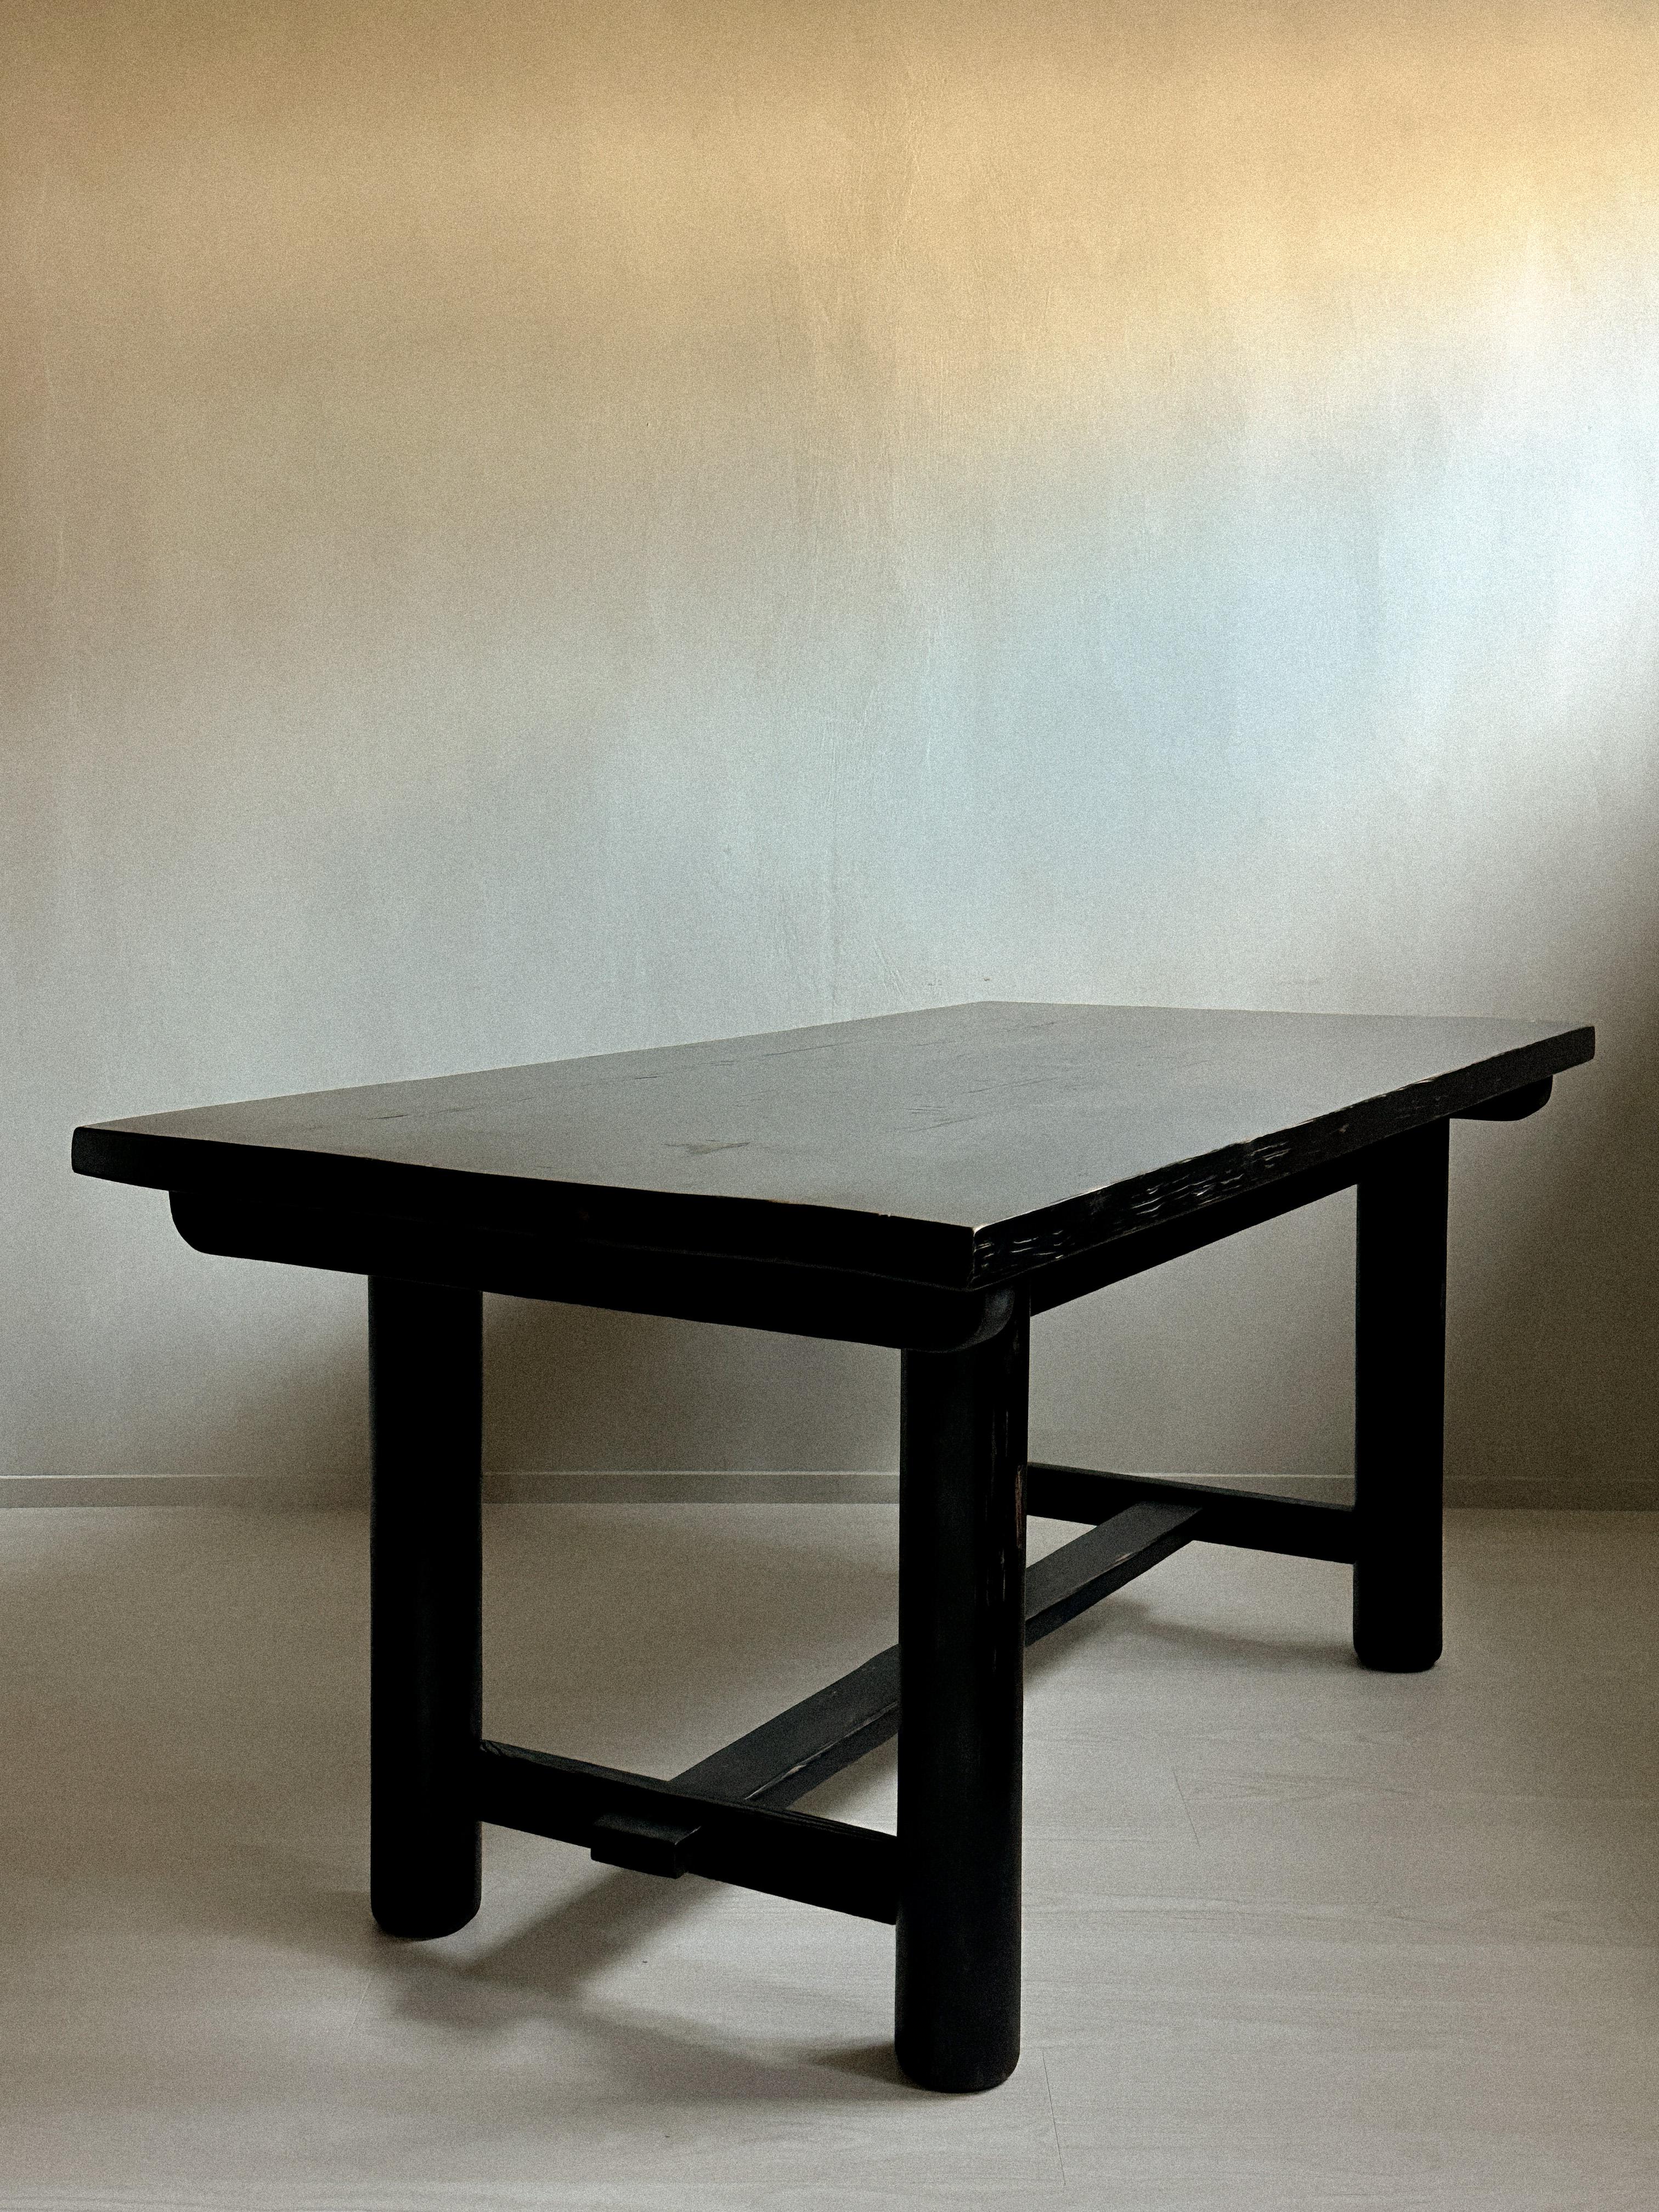 French An Ebonized Meribel Dining Table, Wood, Charlotte Perriand (attr.), France 1959 For Sale